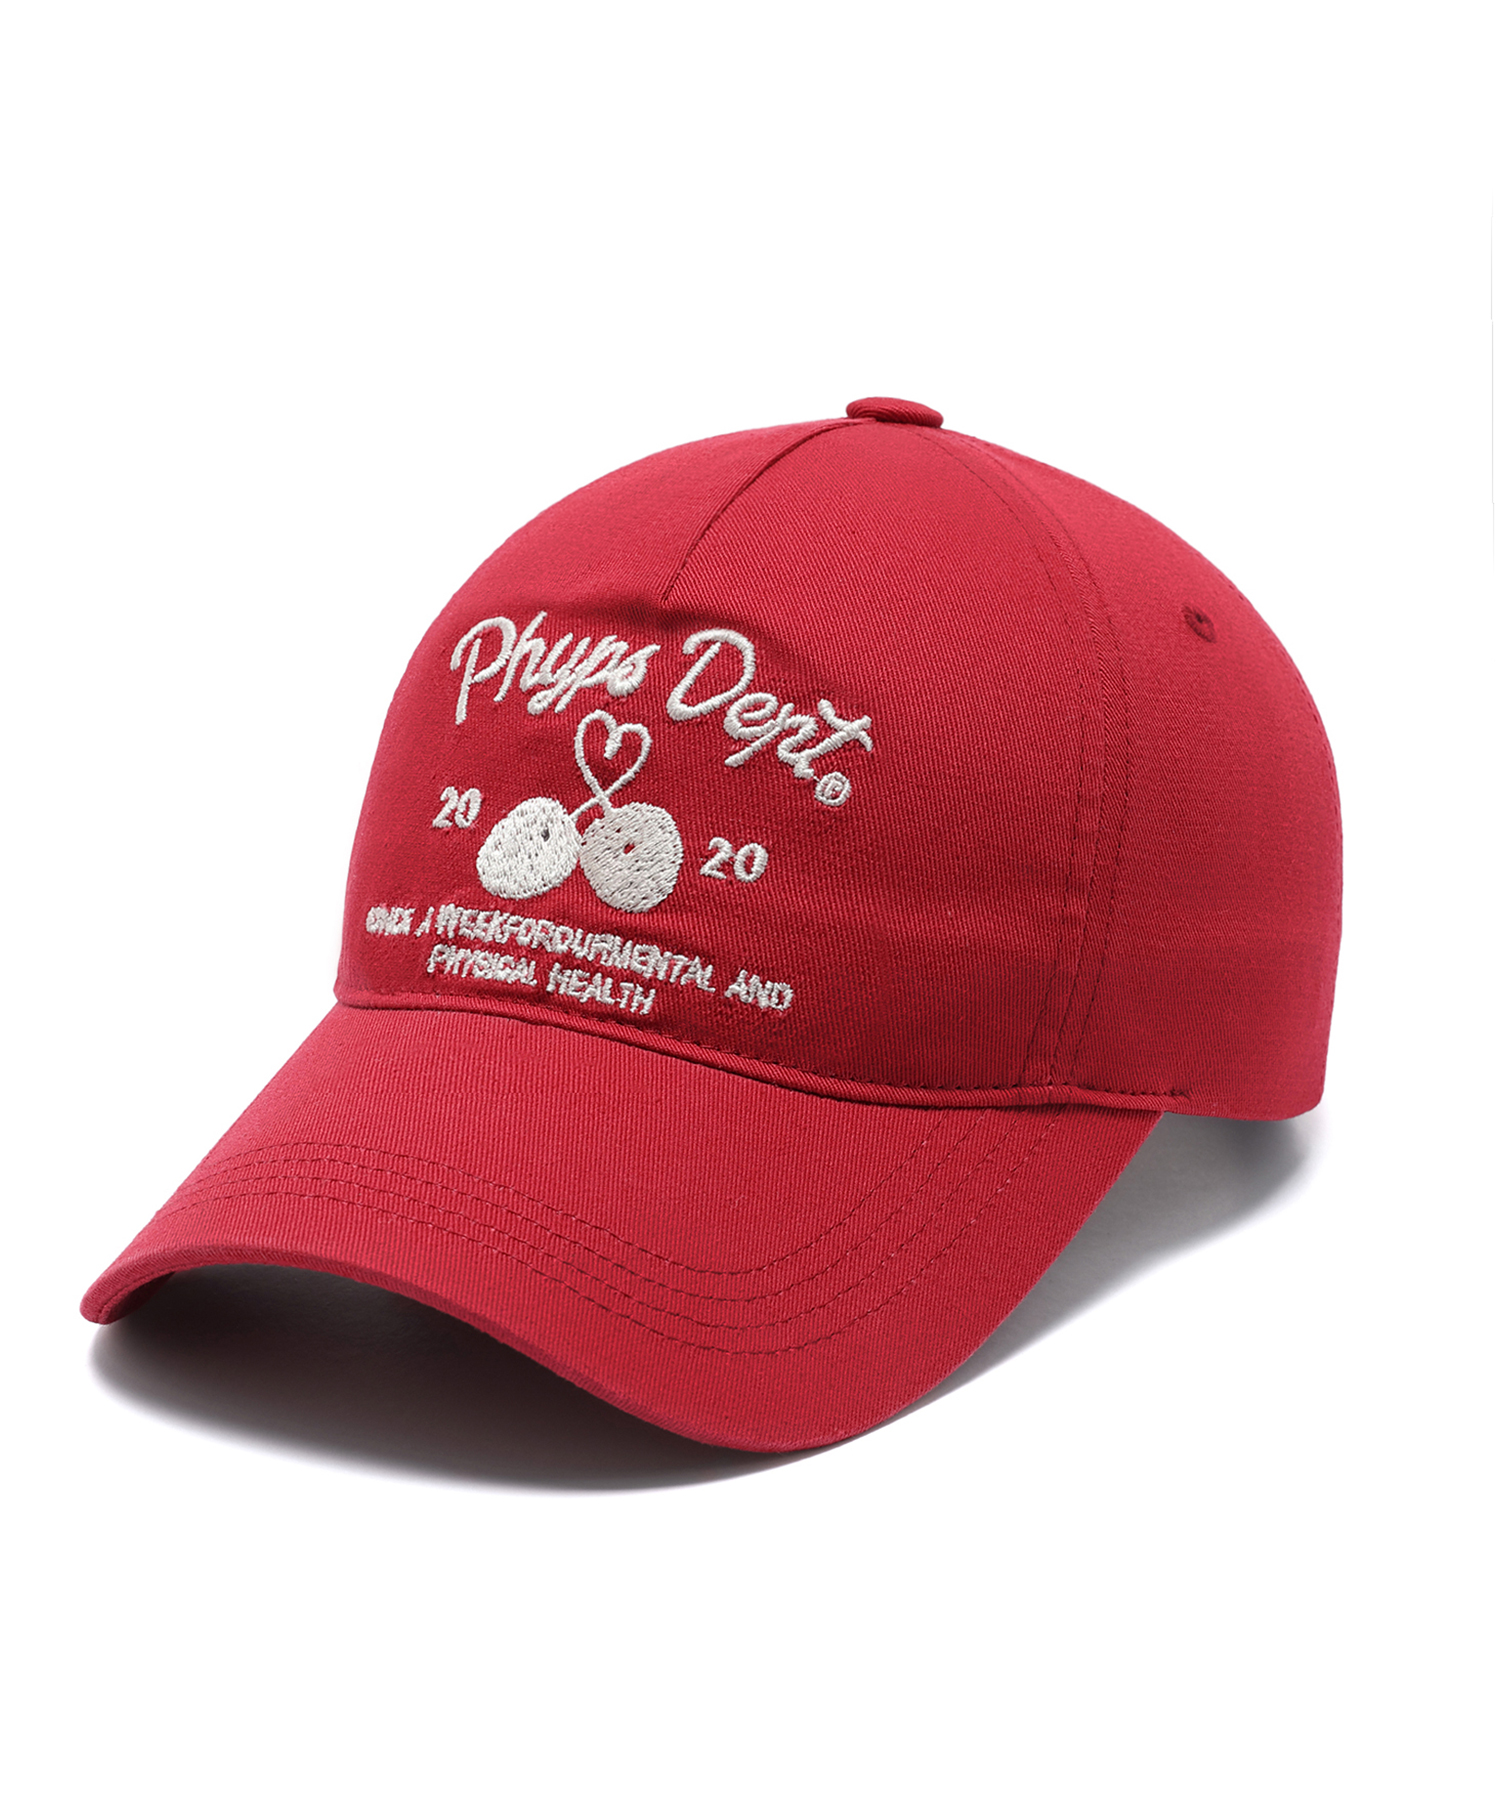 HEART BERRY CAP PINK RED